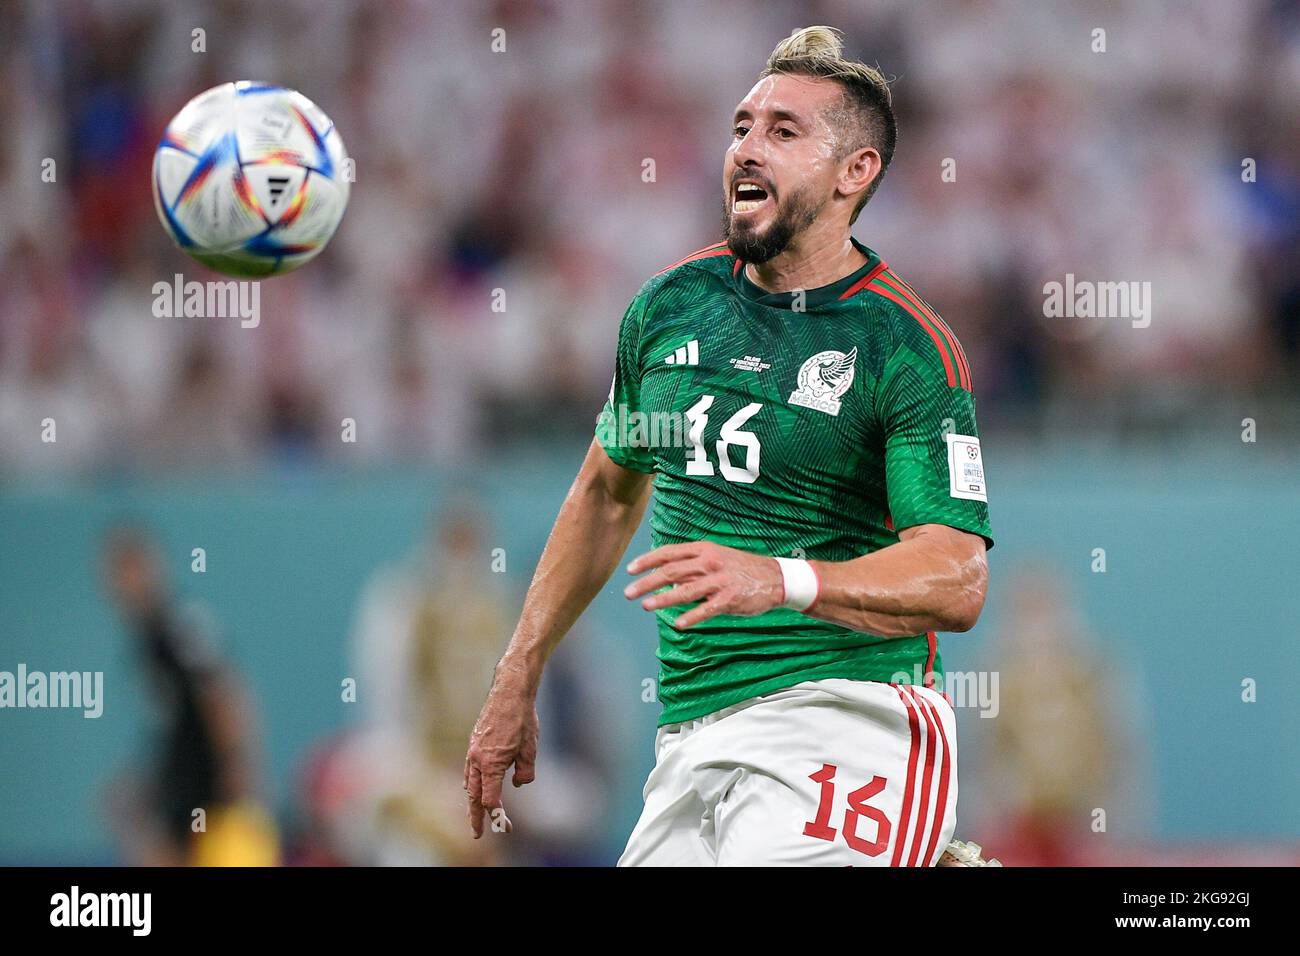 DOHA, QATAR - NOVEMBER 22: Hector Herrera of Mexico runs with the ball during the Group C - FIFA World Cup Qatar 2022 match between Mexico and Poland at Stadium 974 on November 22, 2022 in Doha, Qatar (Photo by Pablo Morano/BSR Agency) Credit: BSR Agency/Alamy Live News Credit: BSR Agency/Alamy Live News Stock Photo